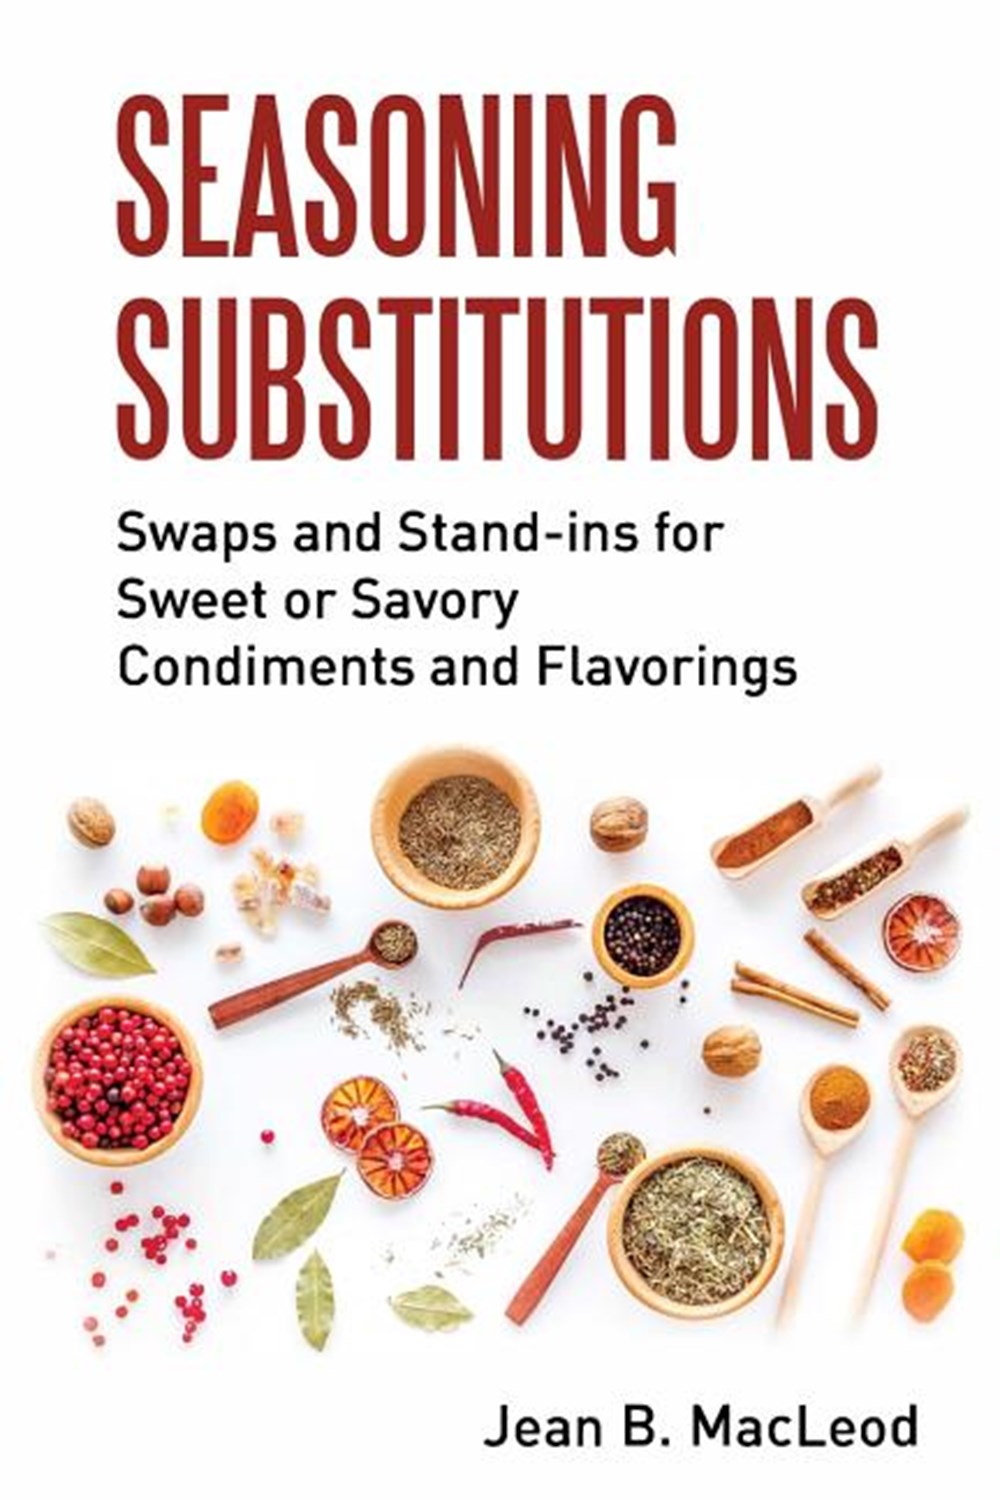 Seasoning Substitutions: Swaps and Stand-ins for Sweet or Savory Condiments and Flavorings